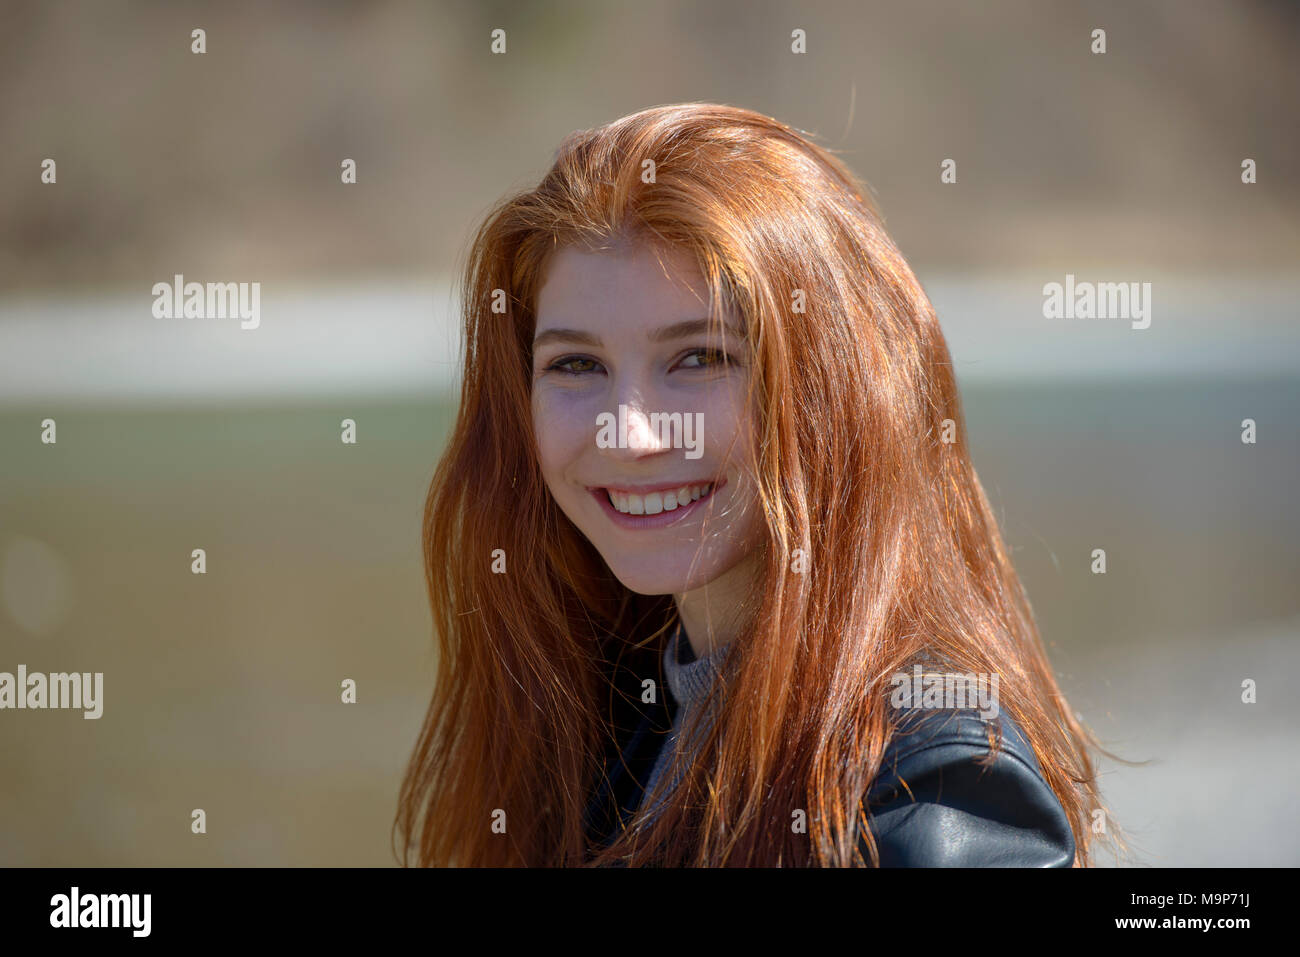 Portrait, young woman, girl, teenager with long red hair, Bavaria, Germany Stock Photo